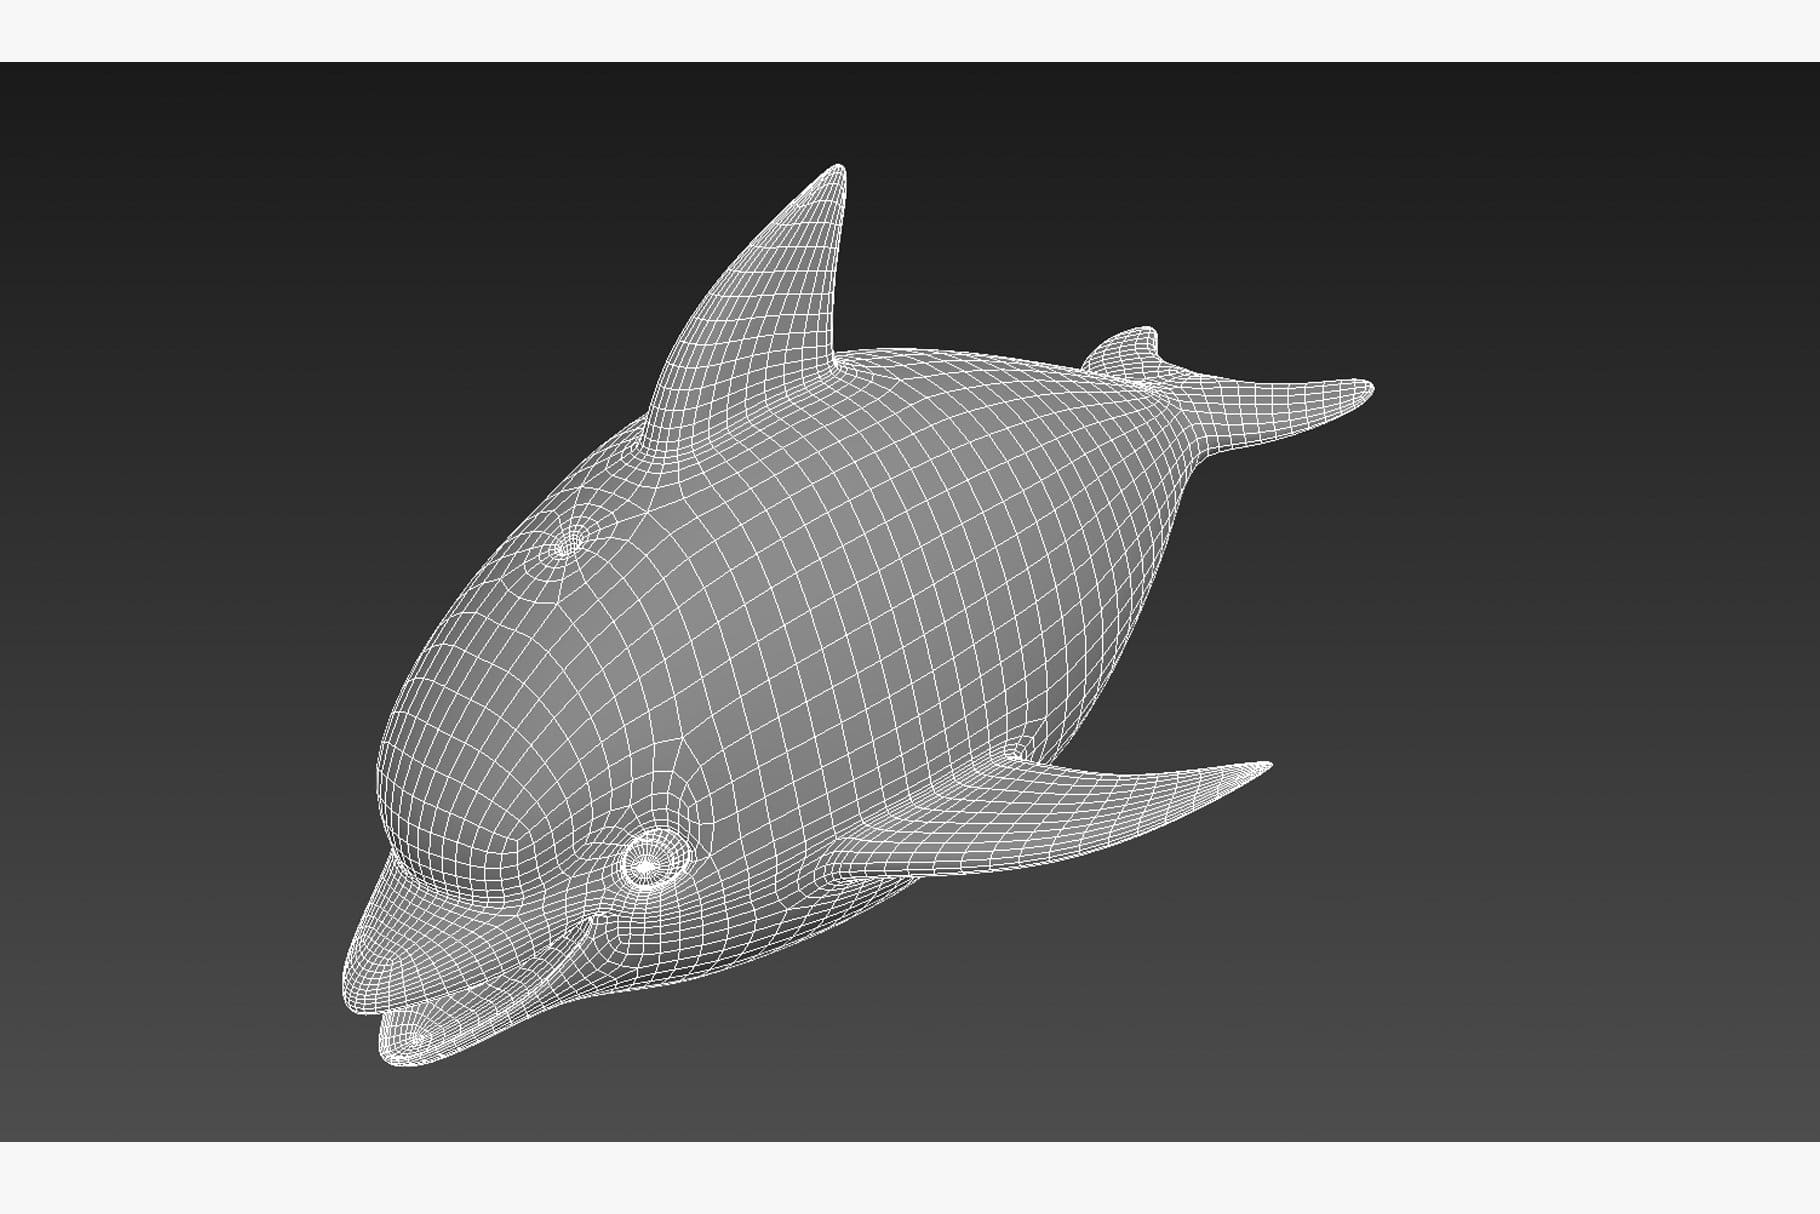 Dolphin leaning face forward, mesh pattern.